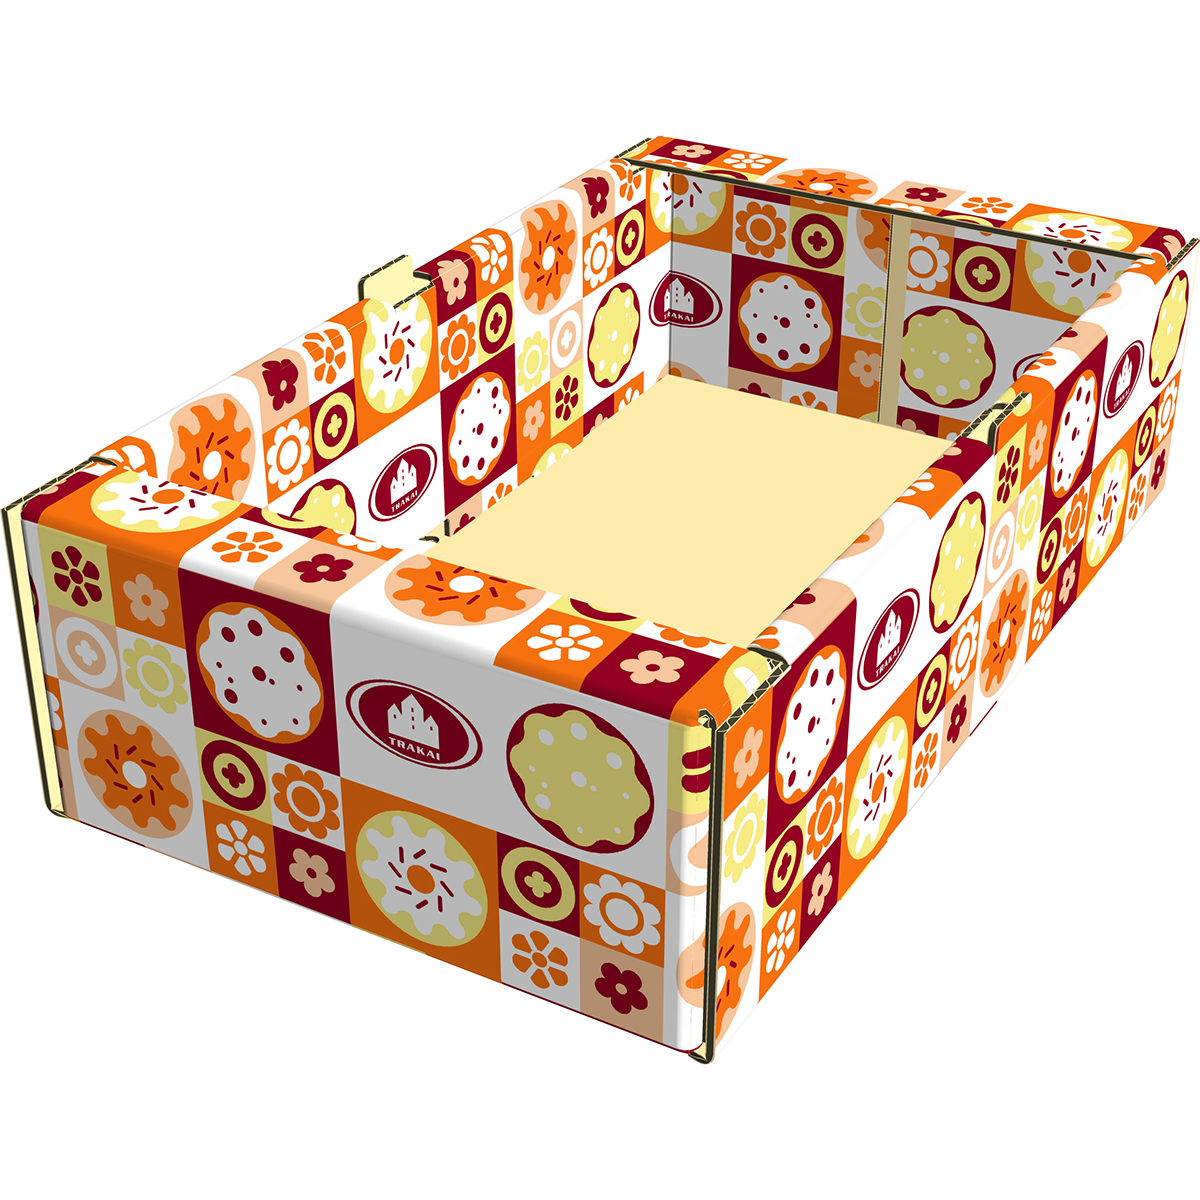 cardboard package Geometrical Composition ornament decor stylized images pattern decorative design flexo printing technique packaging graphic design